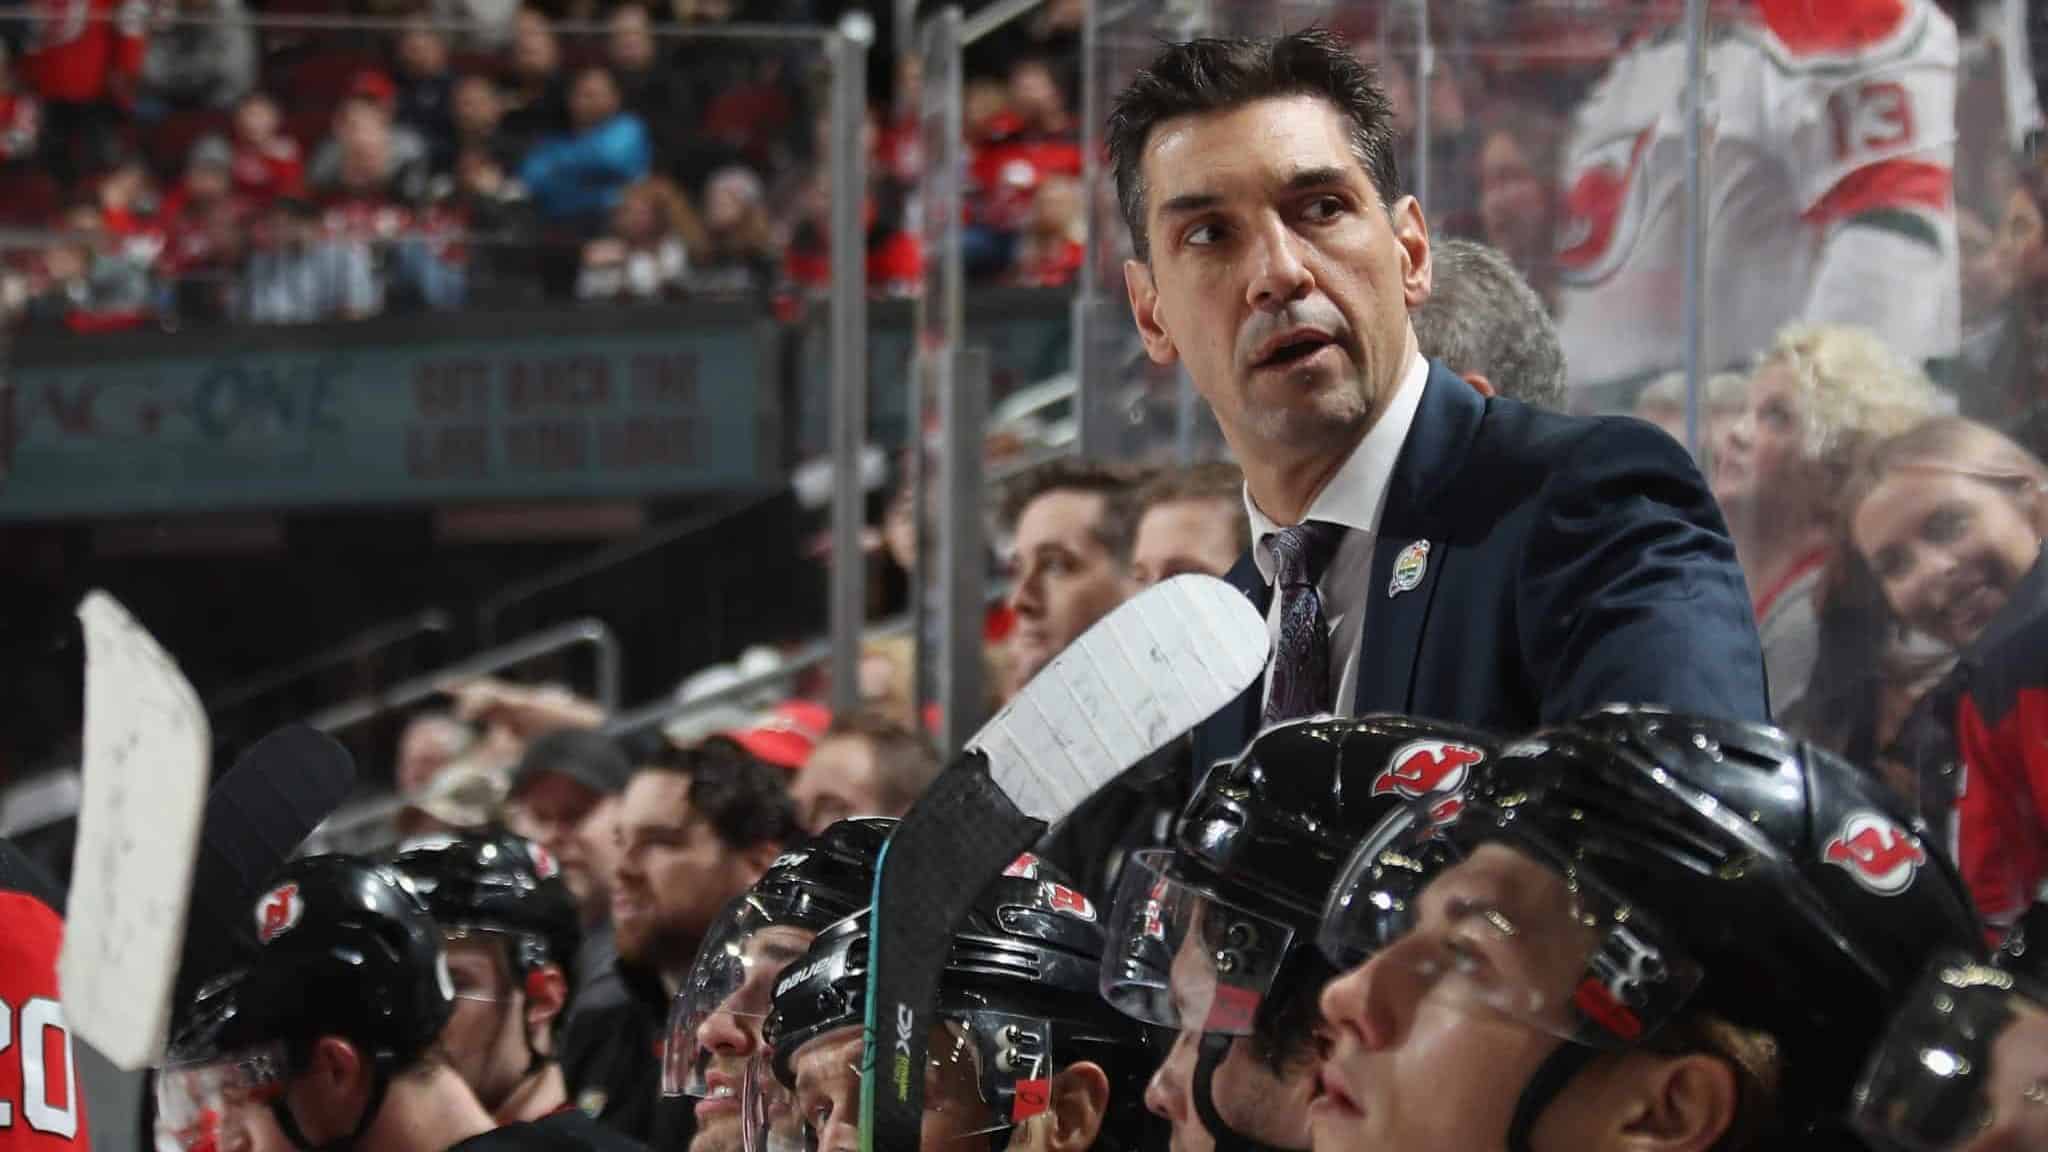 NEWARK, NEW JERSEY - JANUARY 04: Alain Nasreddine, head coach of the New Jersey Devils works the game against the Colorado Avalanche at the Prudential Center on January 04, 2020 in Newark, New Jersey.